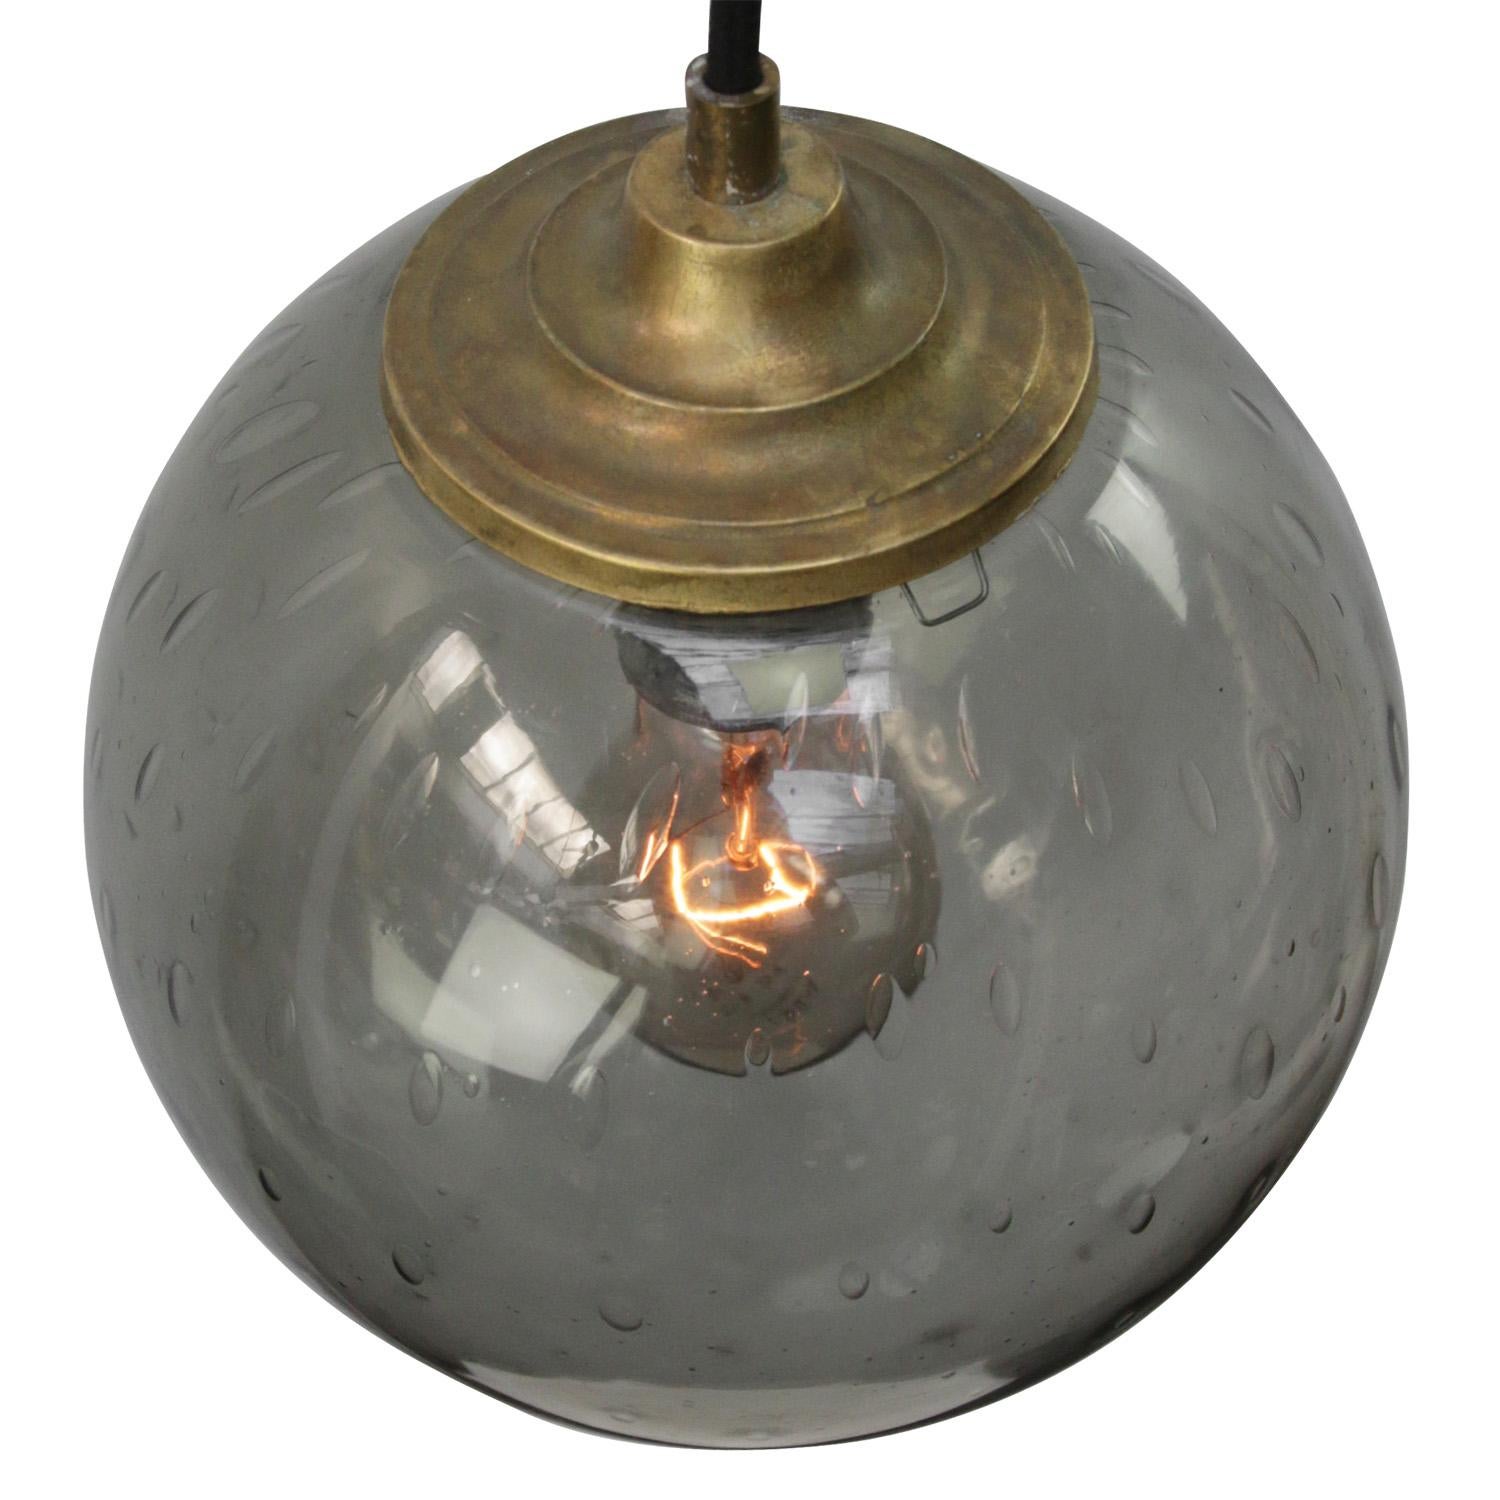 Original vintage smoked air bubble glass pendant.
2 meter Black wire
Brass top

Weight: 2.20 kg / 4.9 lb

Priced per individual item. All lamps have been made suitable by international standards for incandescent light bulbs, energy-efficient